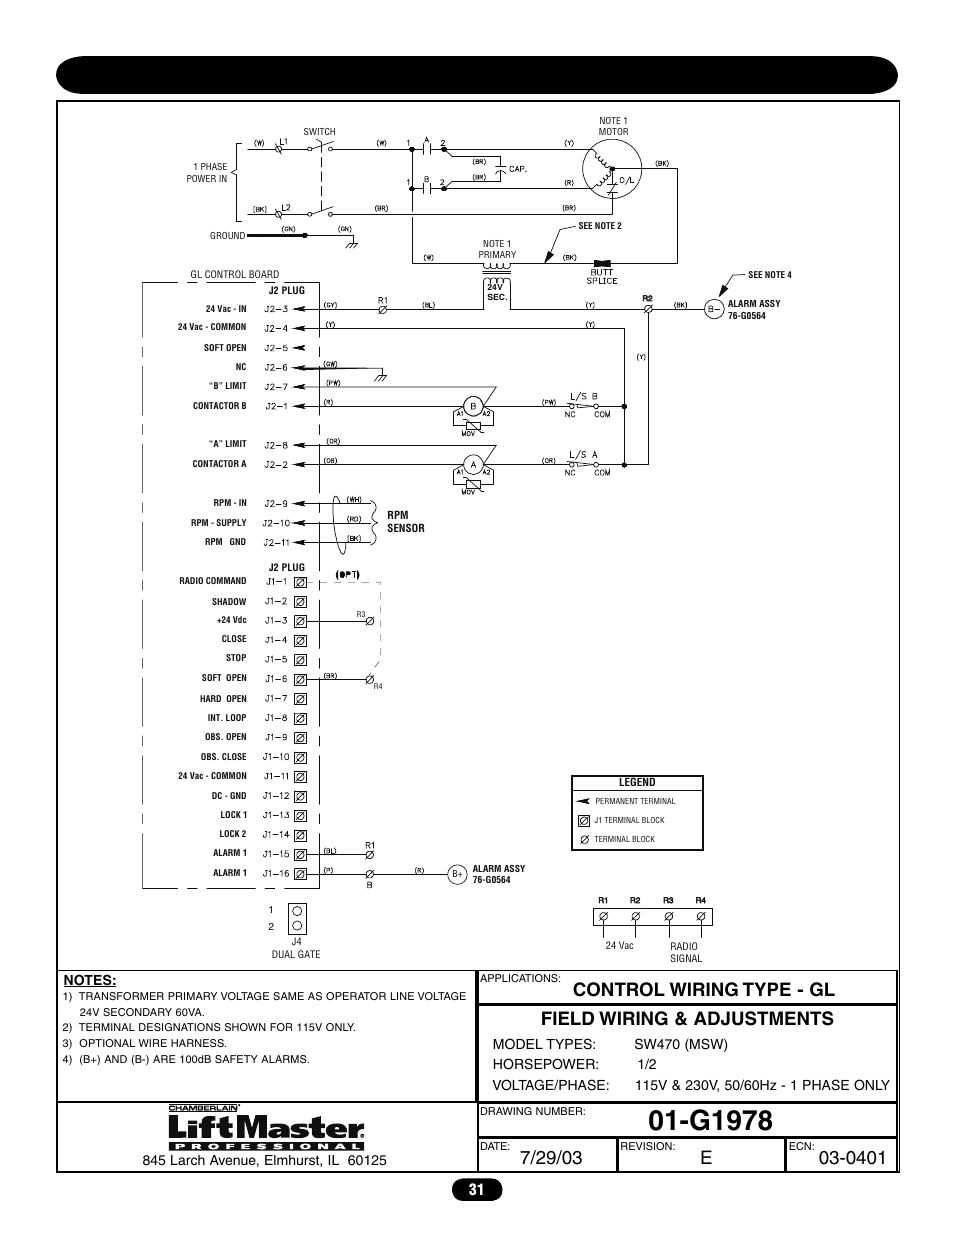 Single phase wiring diagram (sw470), G1978 | Chamberlain LIFTMASTER PROFESSIONAL SW470 User Manual | Page 31 / 40